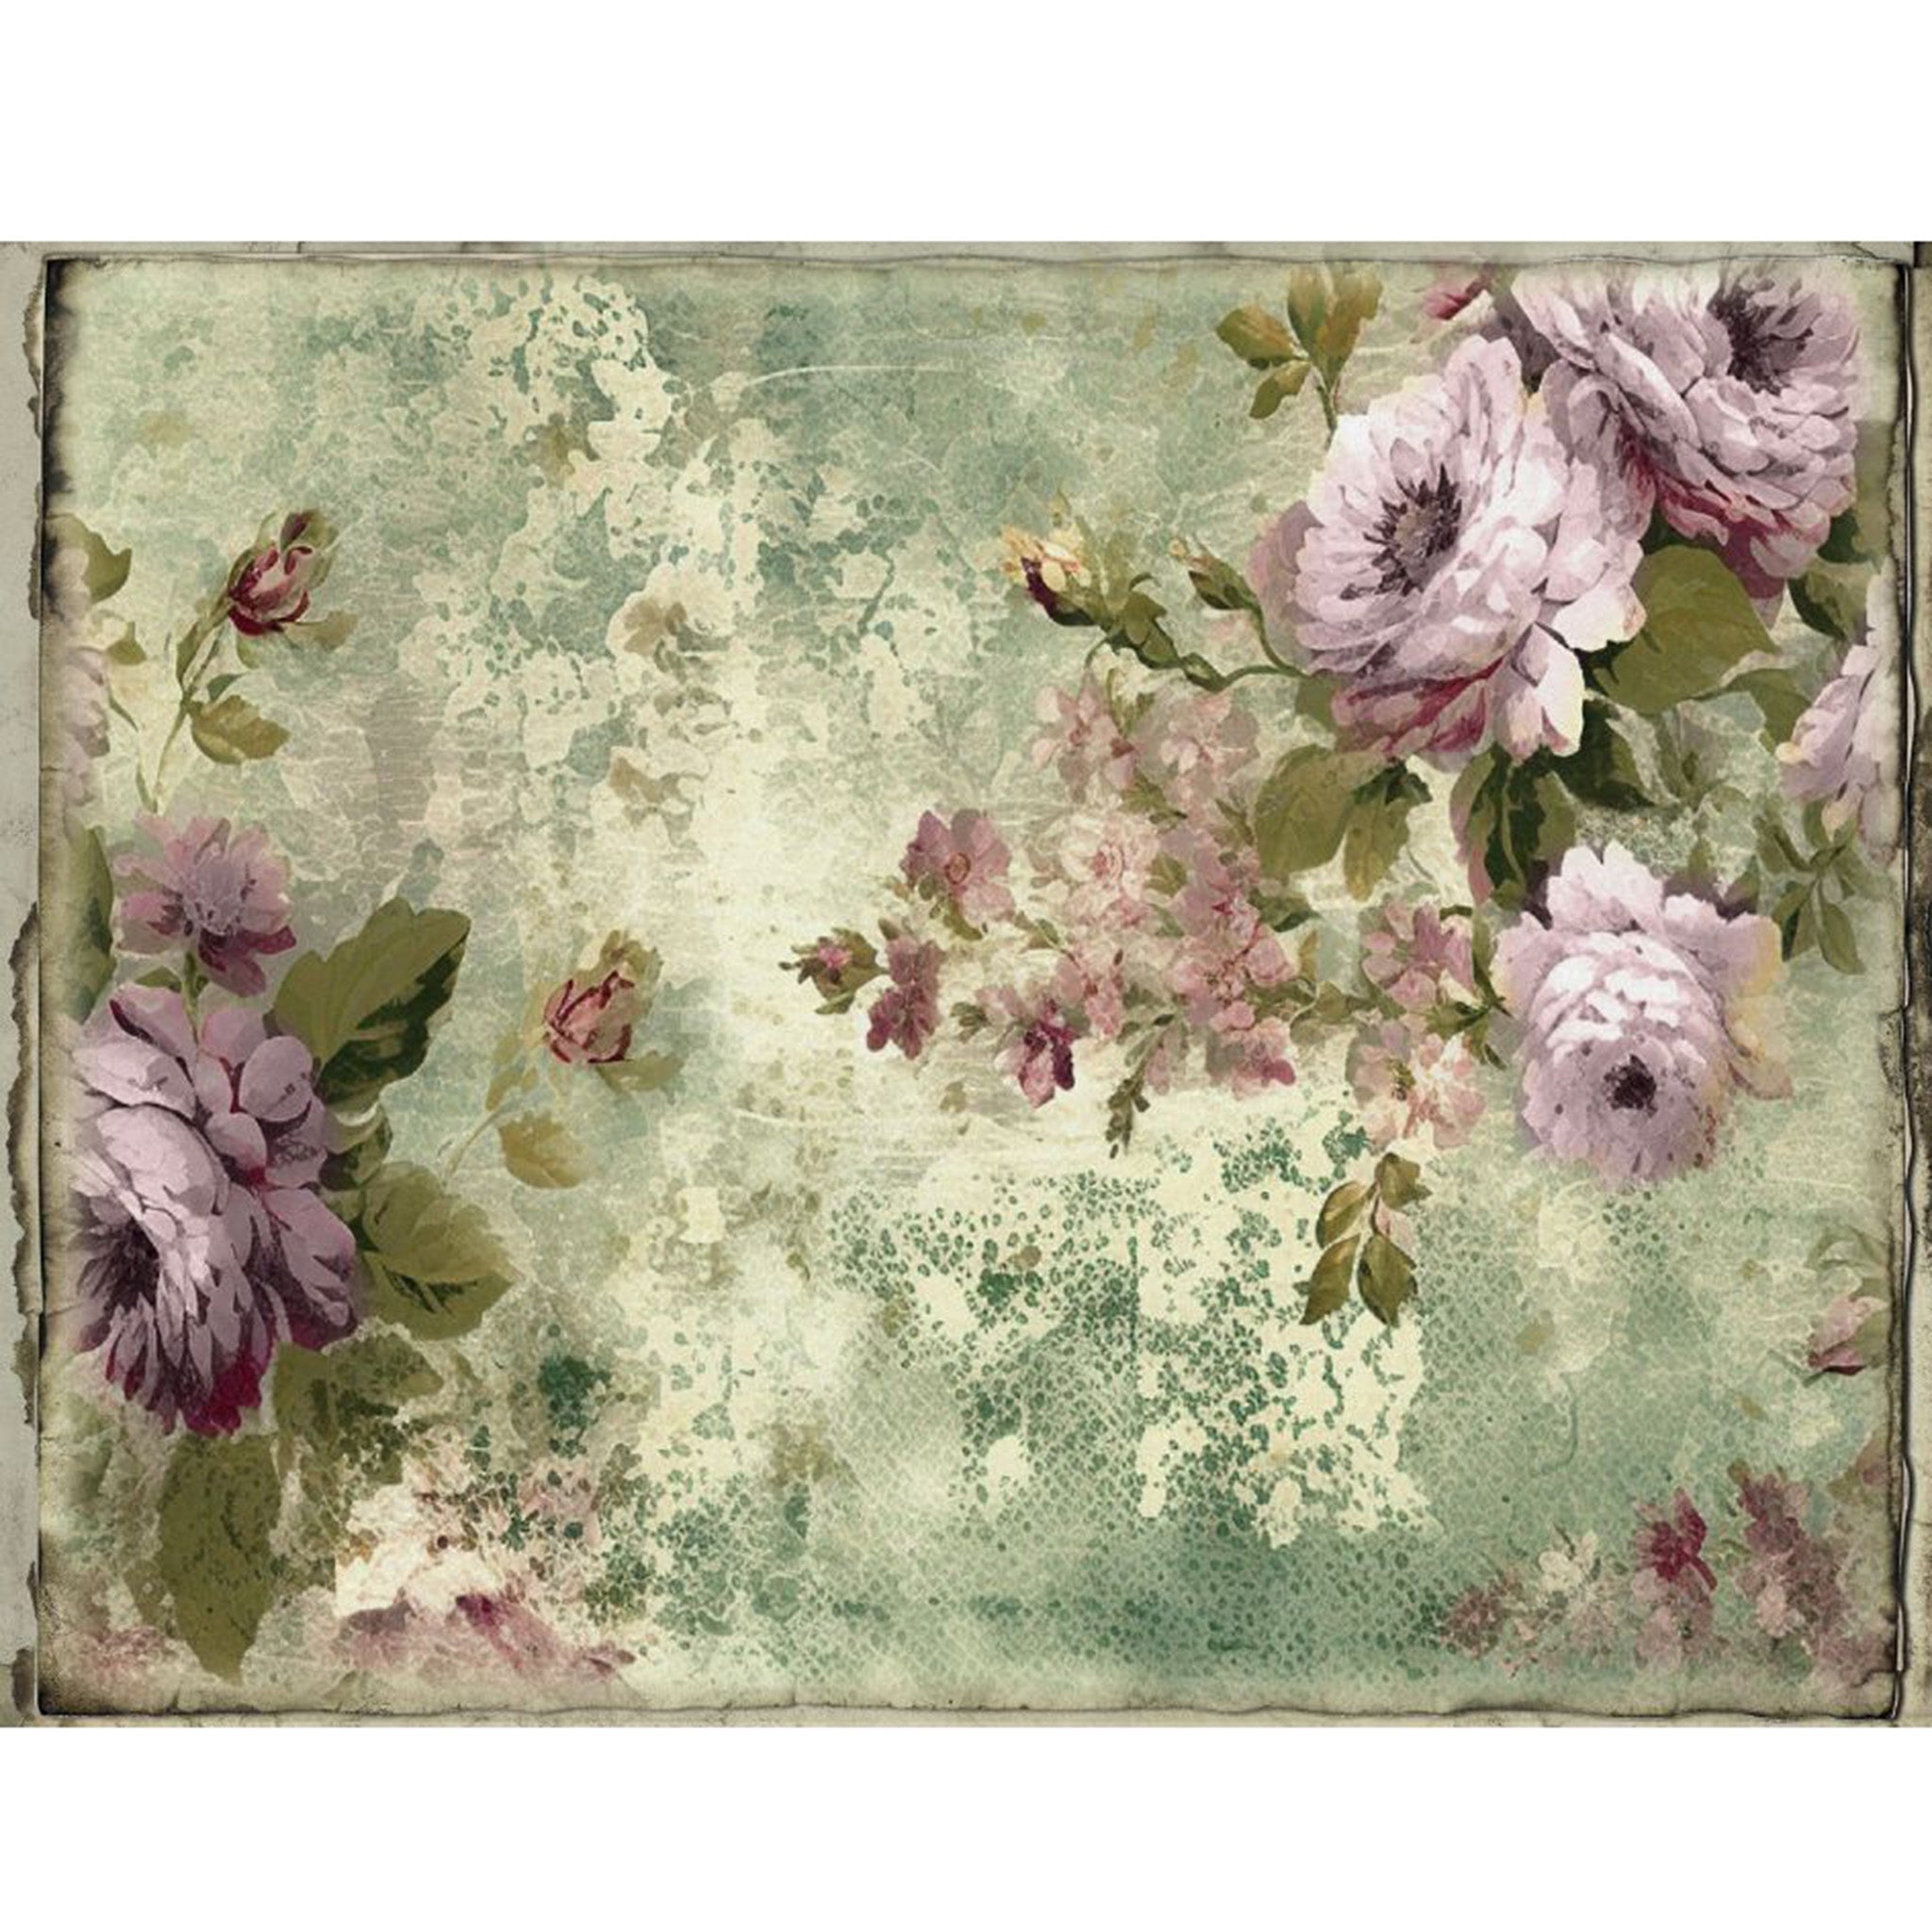 Tissue paper design featuring clusters of lavender colored flowers against a distressed light sage background. White borders are on the top and bottom.